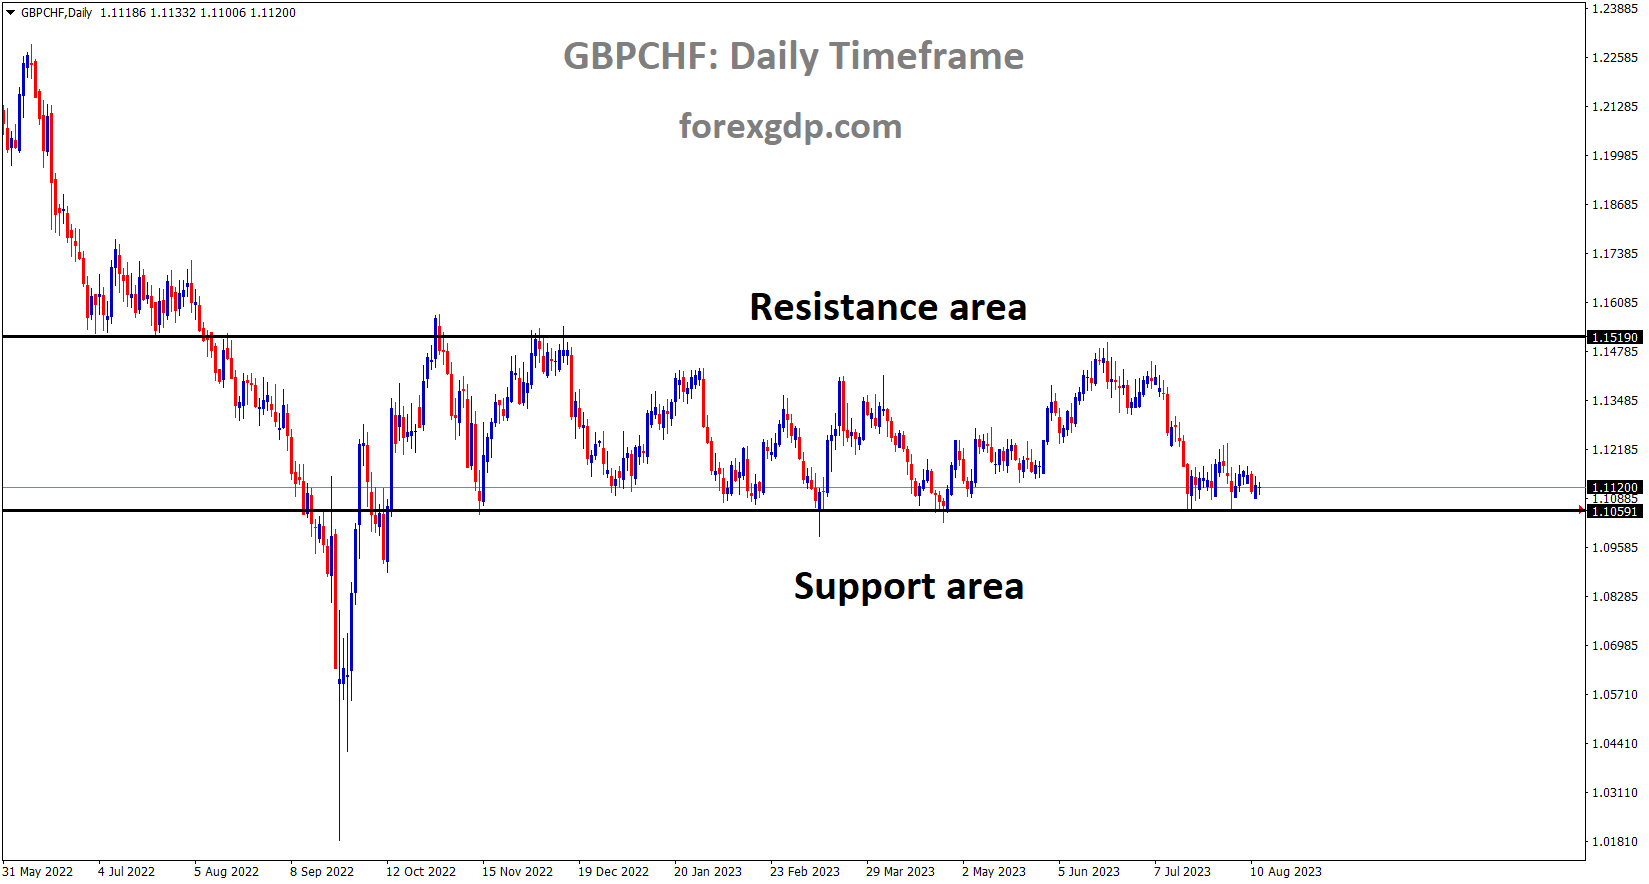 GBPCHF is moving in the Box pattern and the market has rebounded from the horizontal support area of the pattern